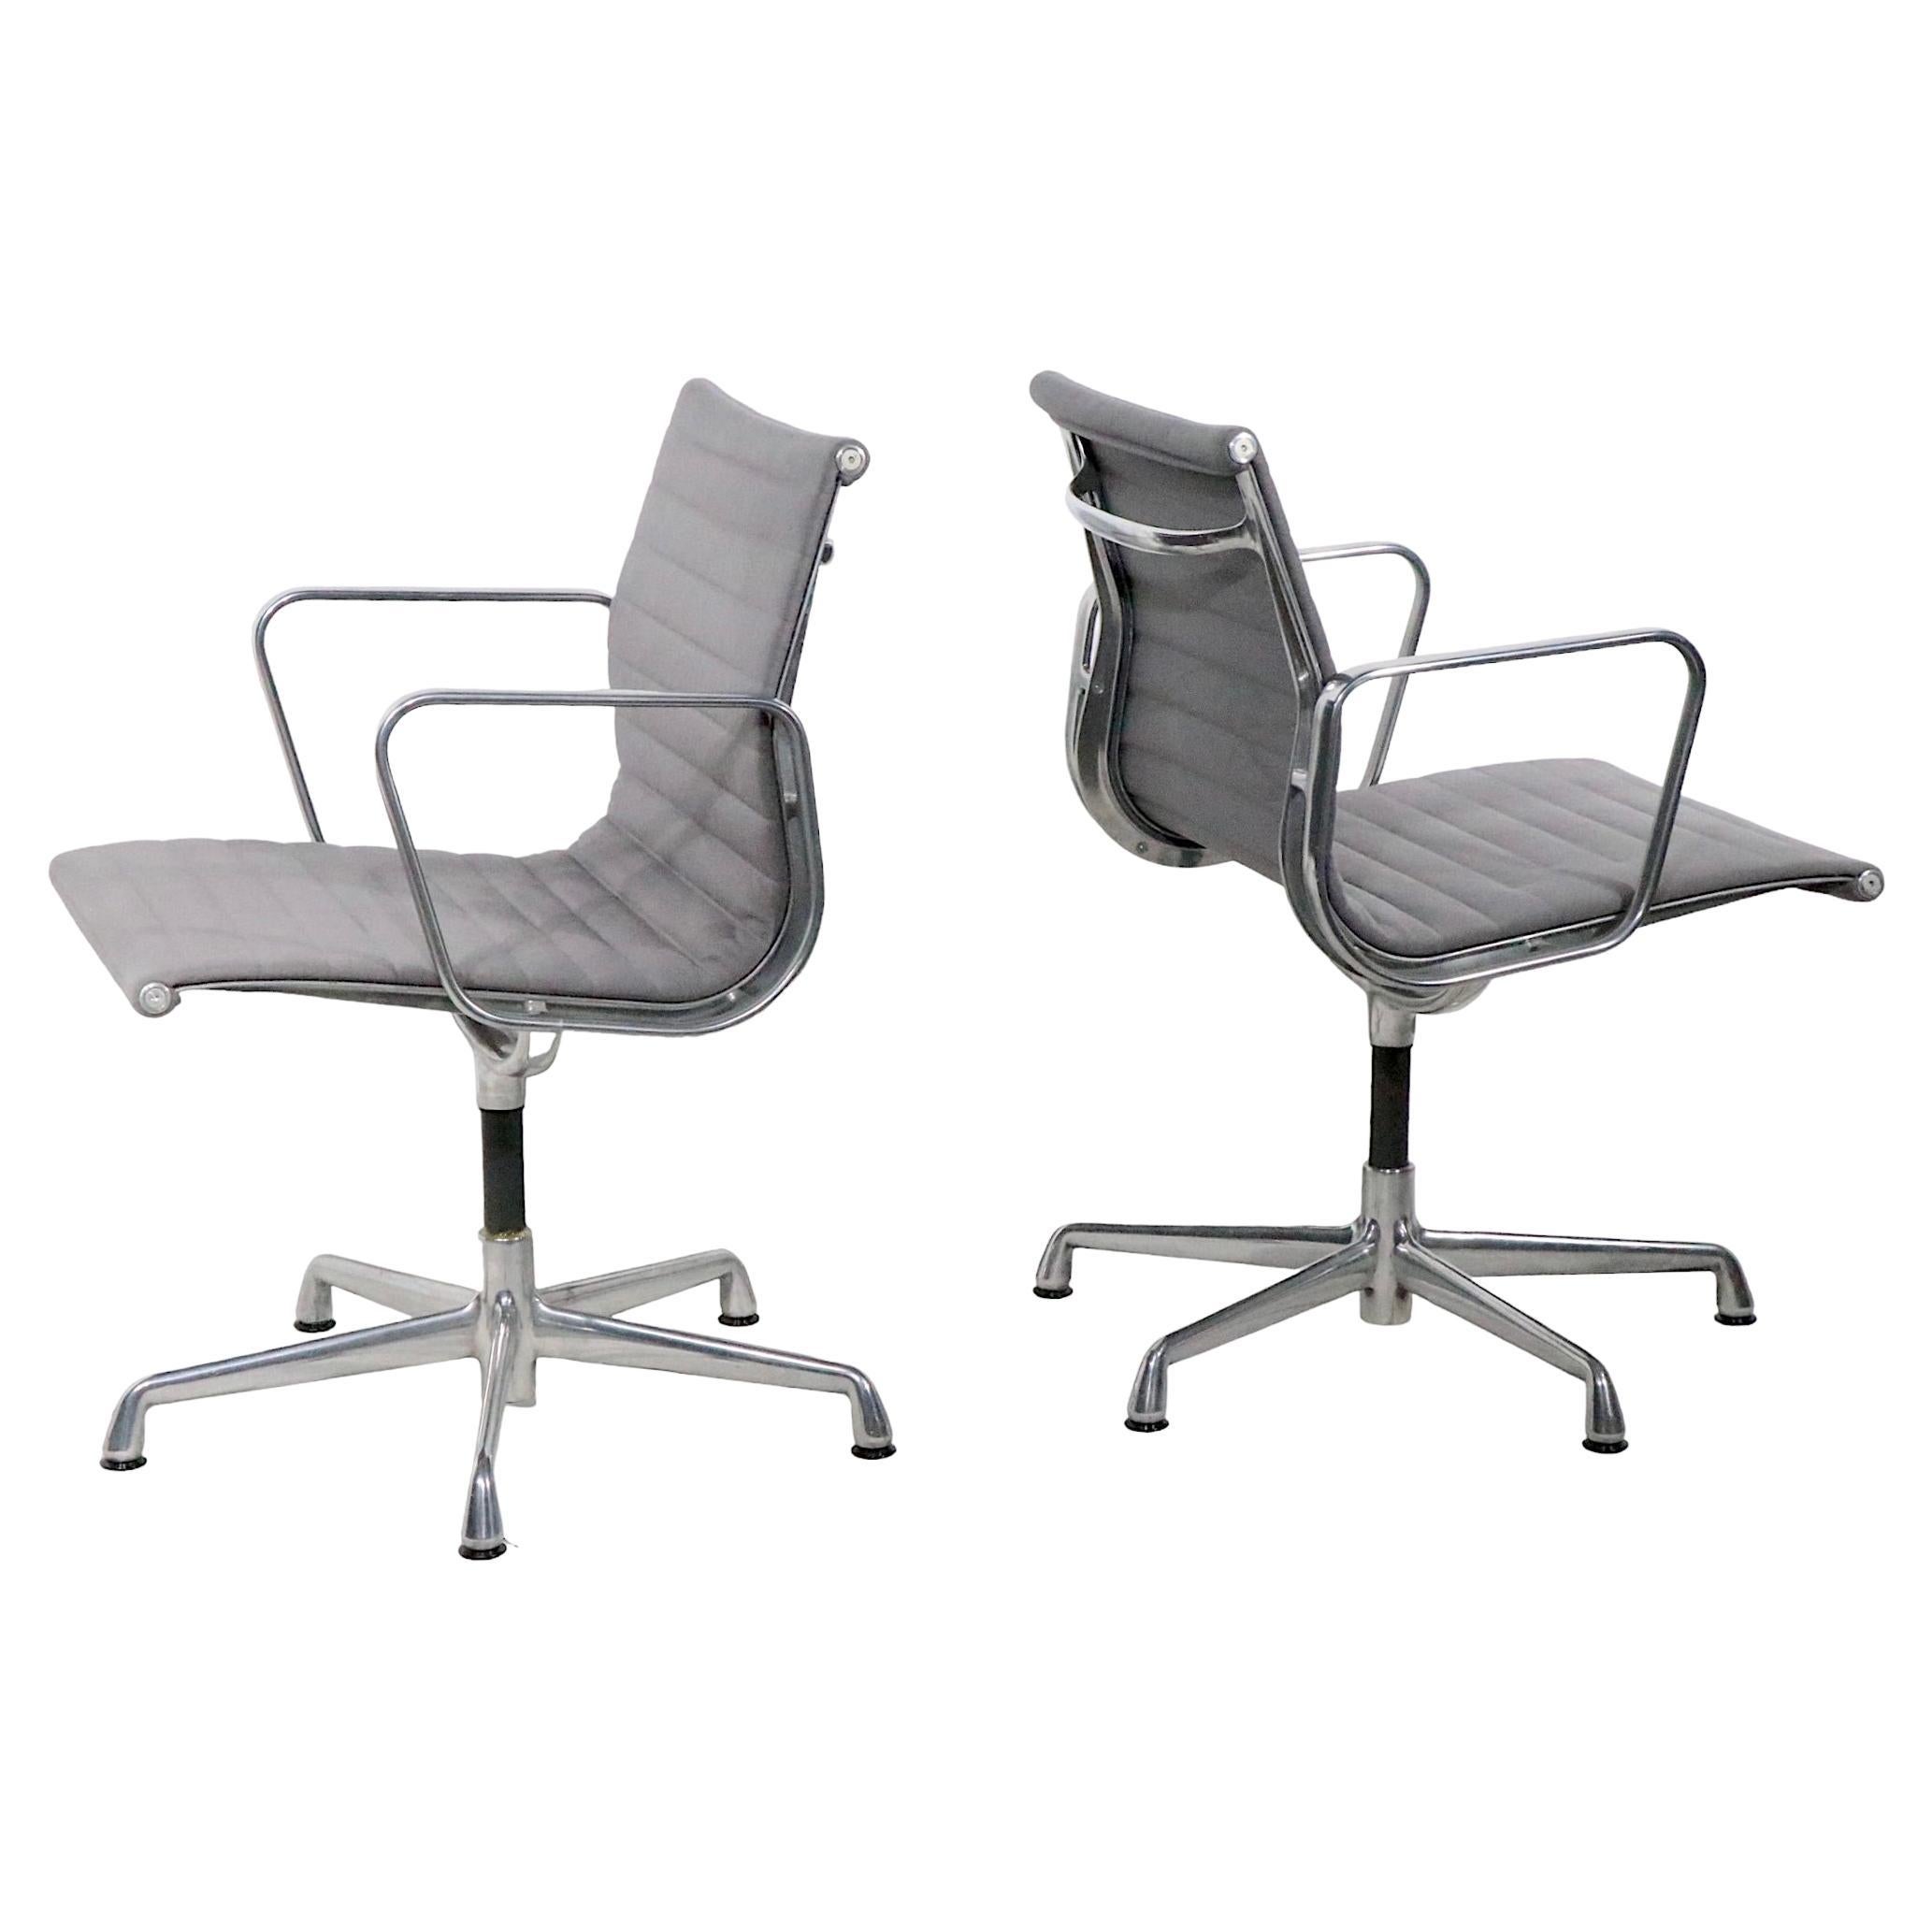 Eames Management Chairs in Grey Fabric Upholstery c. 1980 - 1990s 4 Available 